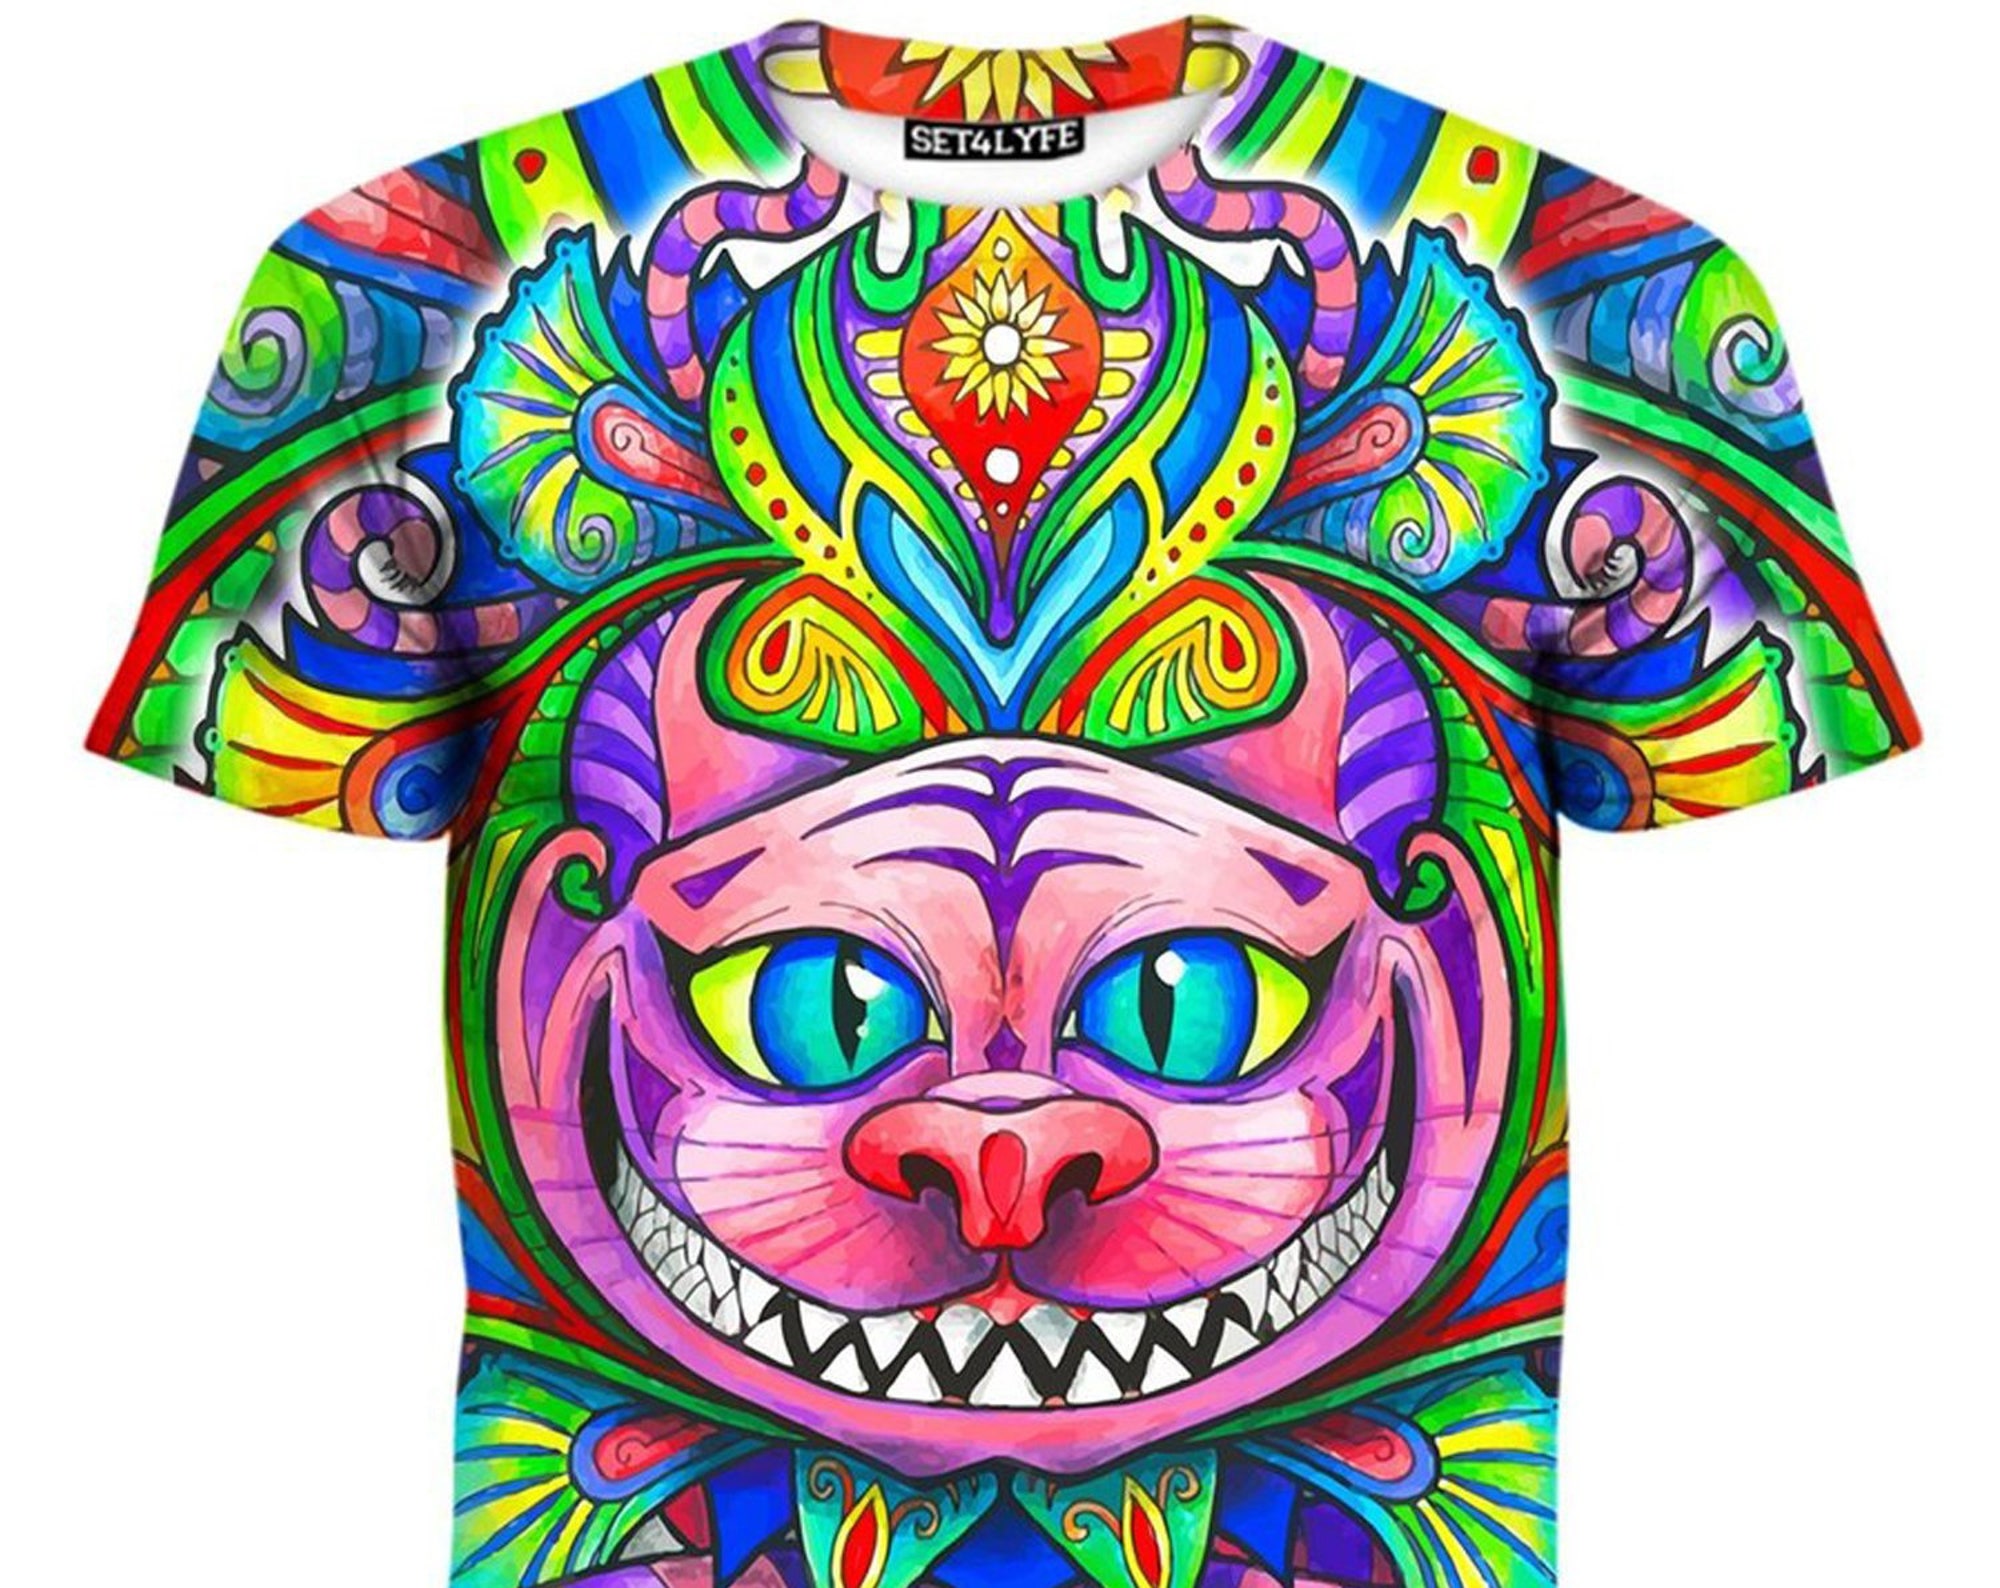 Discover Cheshire Cat Geometric Psychedelic Colorful Vibrant Animal 3D Graphic T-Shirt